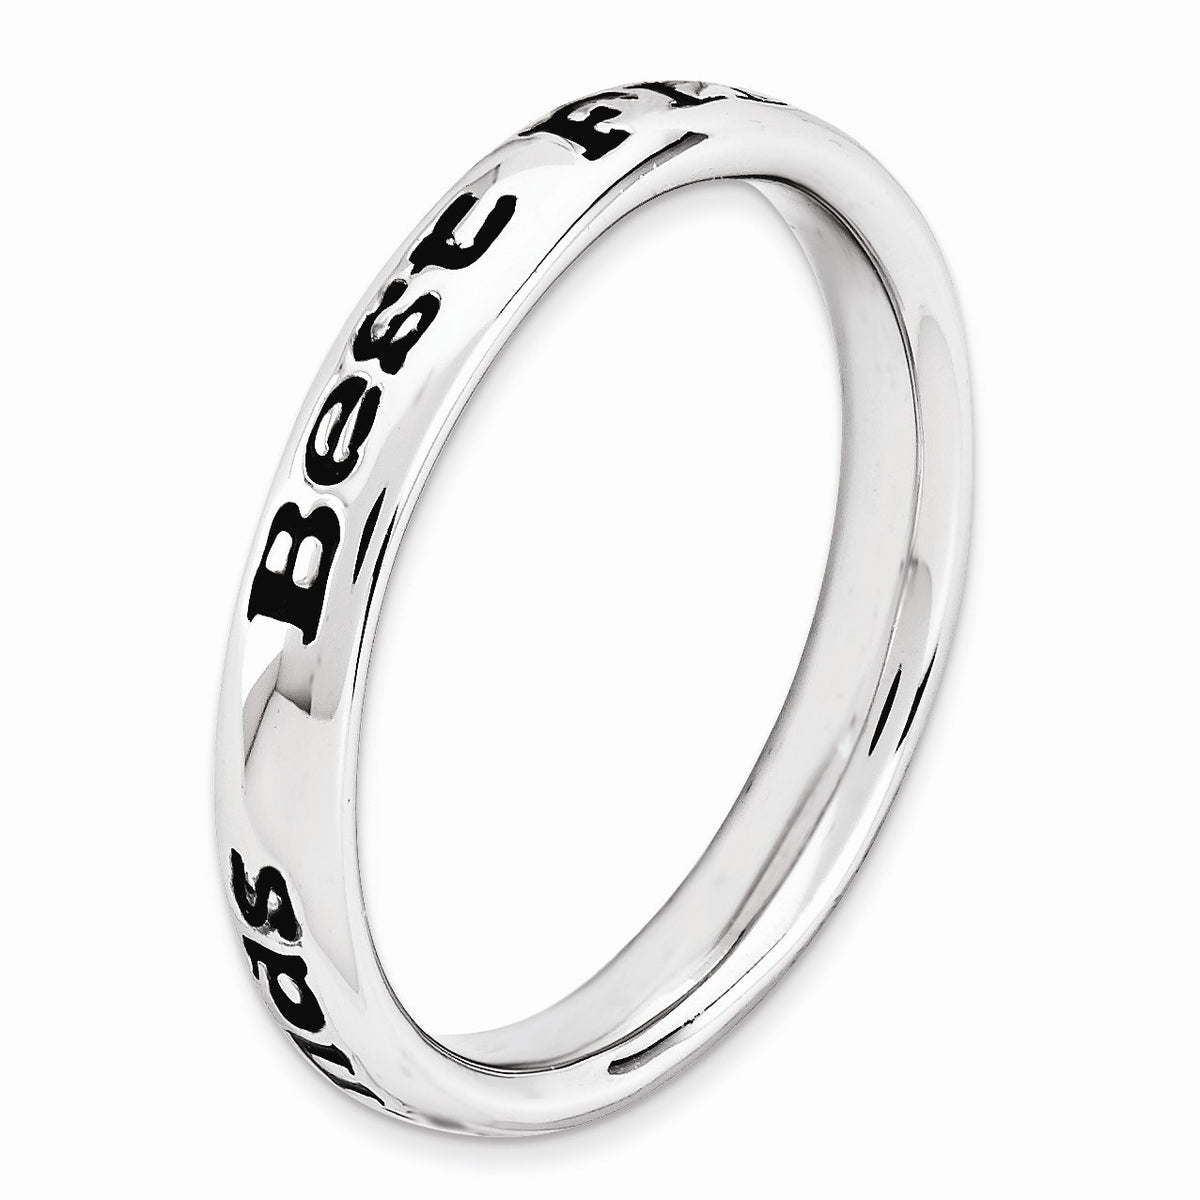 Alternate view of the 3.5mm Sterling Silver Stackable Black Enamel Best Friends Script Band by The Black Bow Jewelry Co.